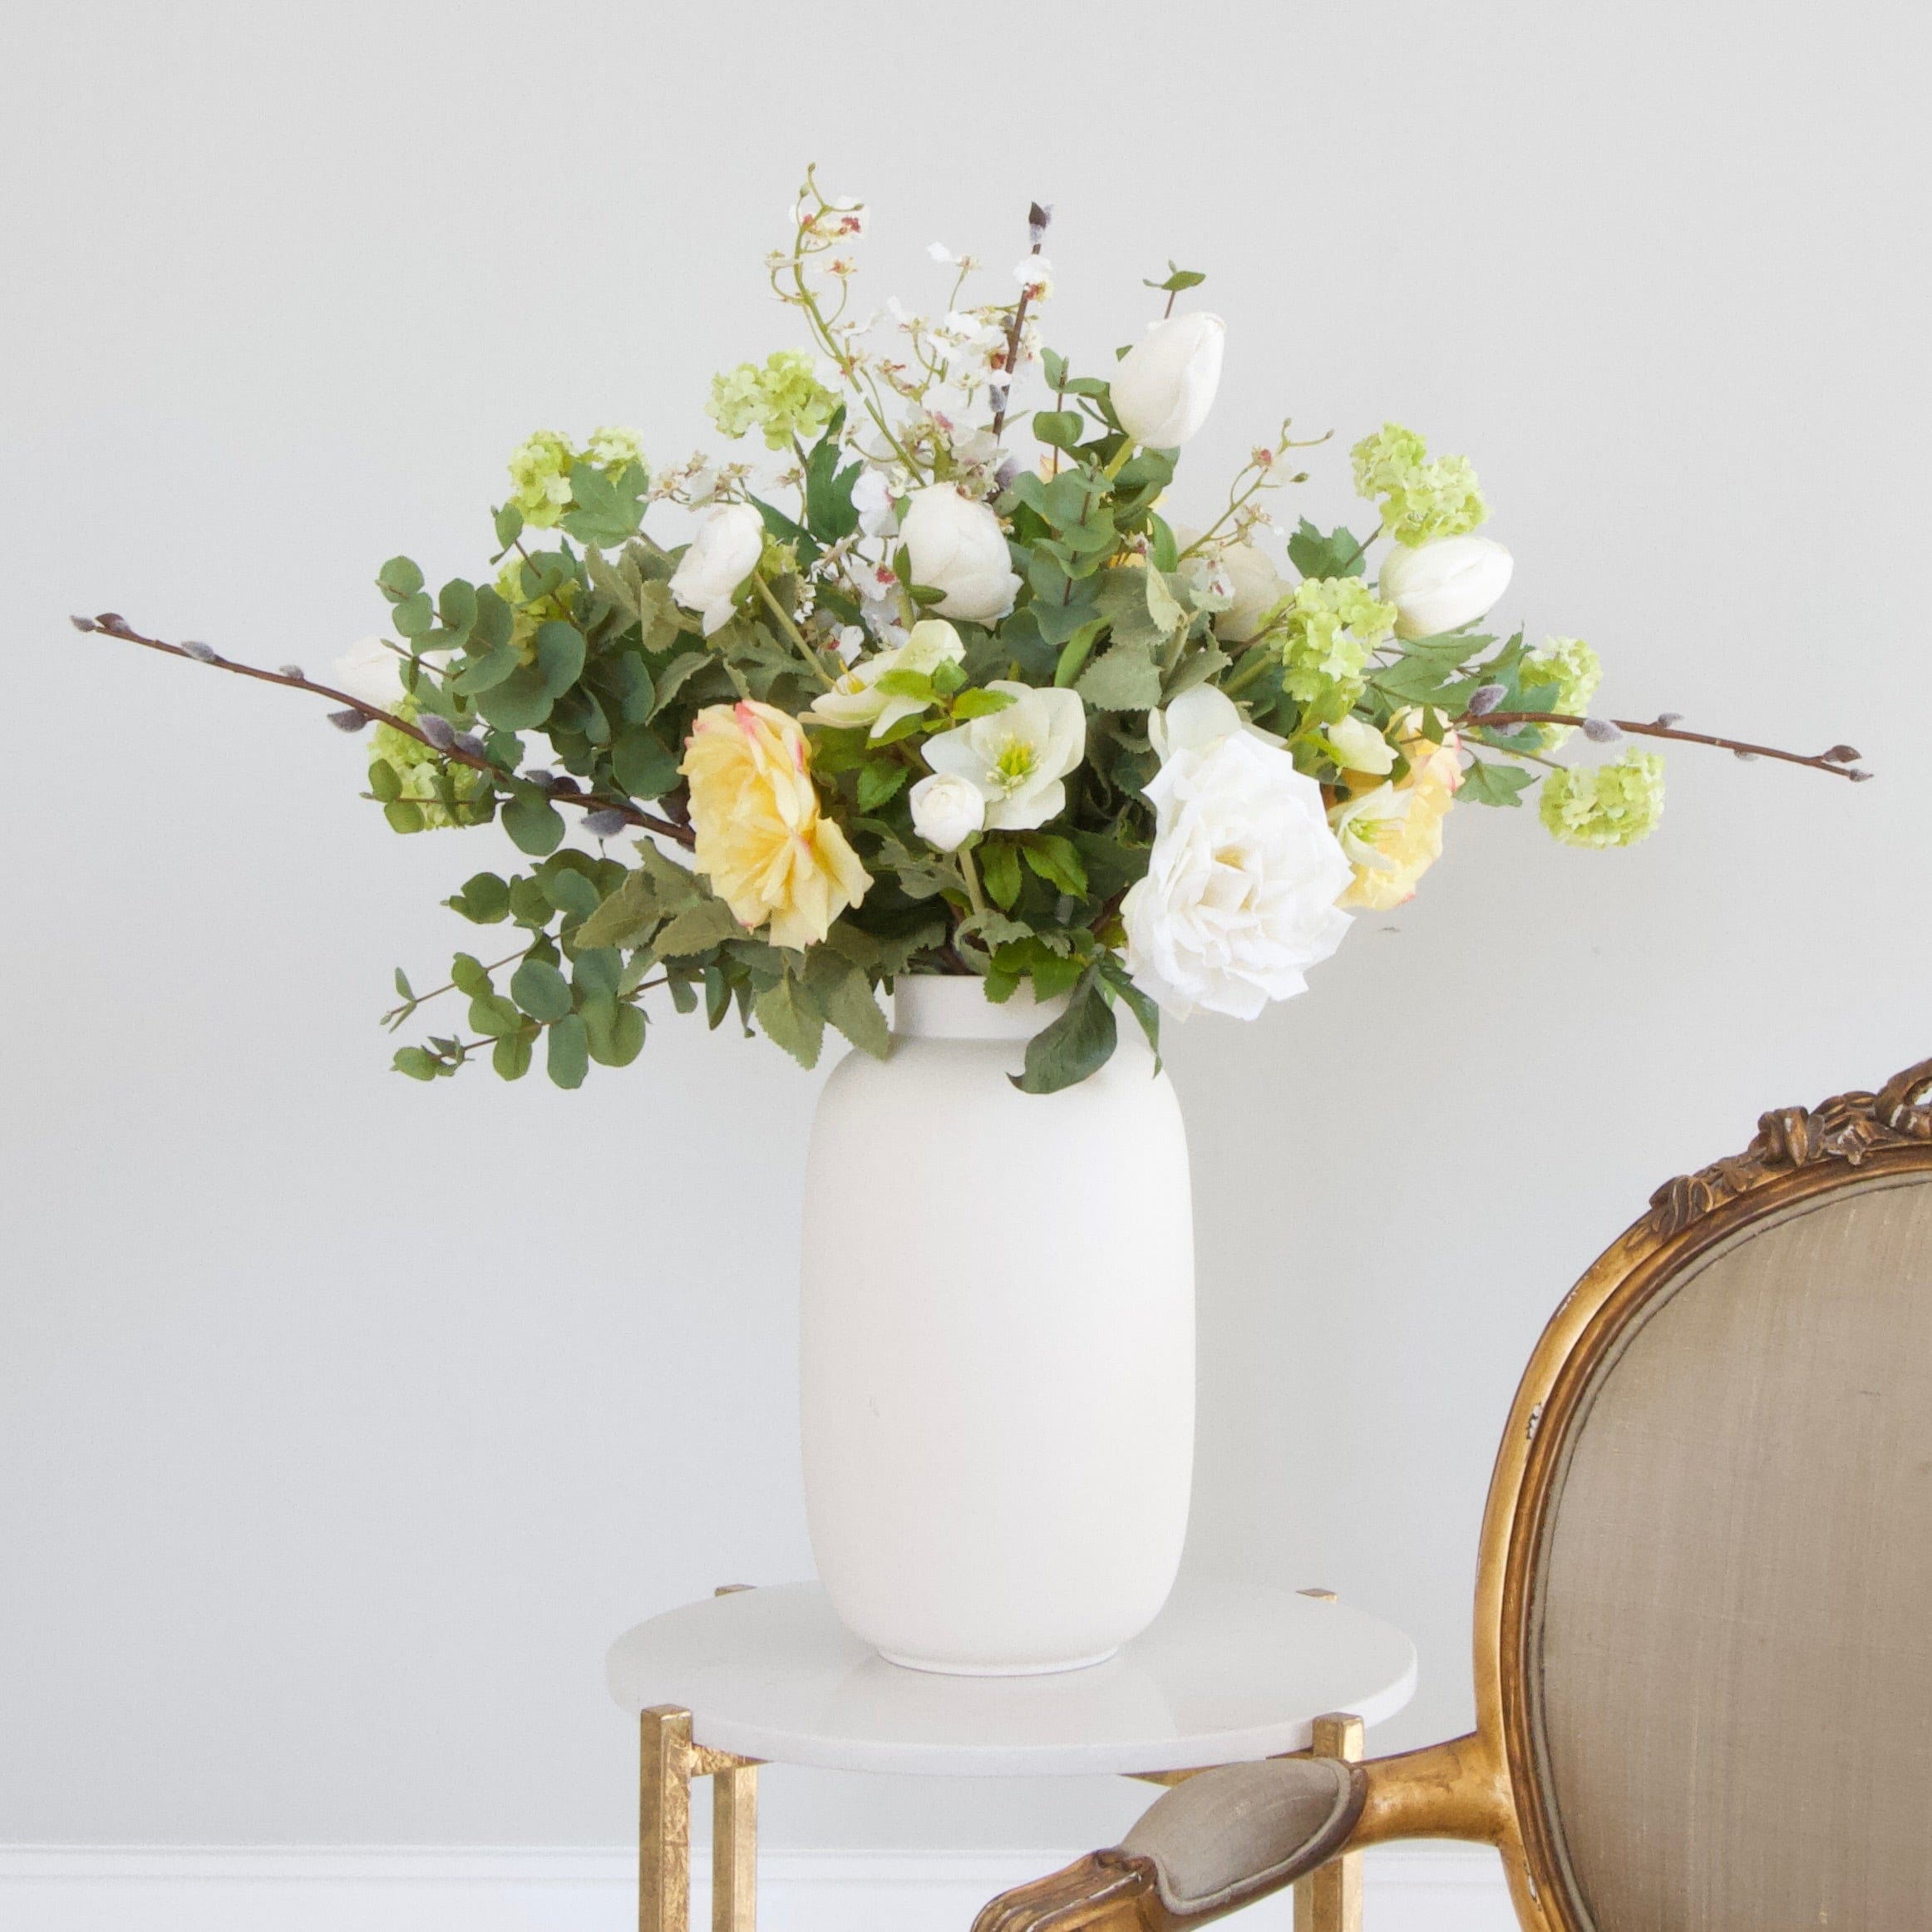 Luxury Lifelike Realistic Artificial Fabric Silk Blooms with Foliage Buy Online from The Faux Flower Company | Spring Fling Neutral Yellow Bouquet Stem Arrangement